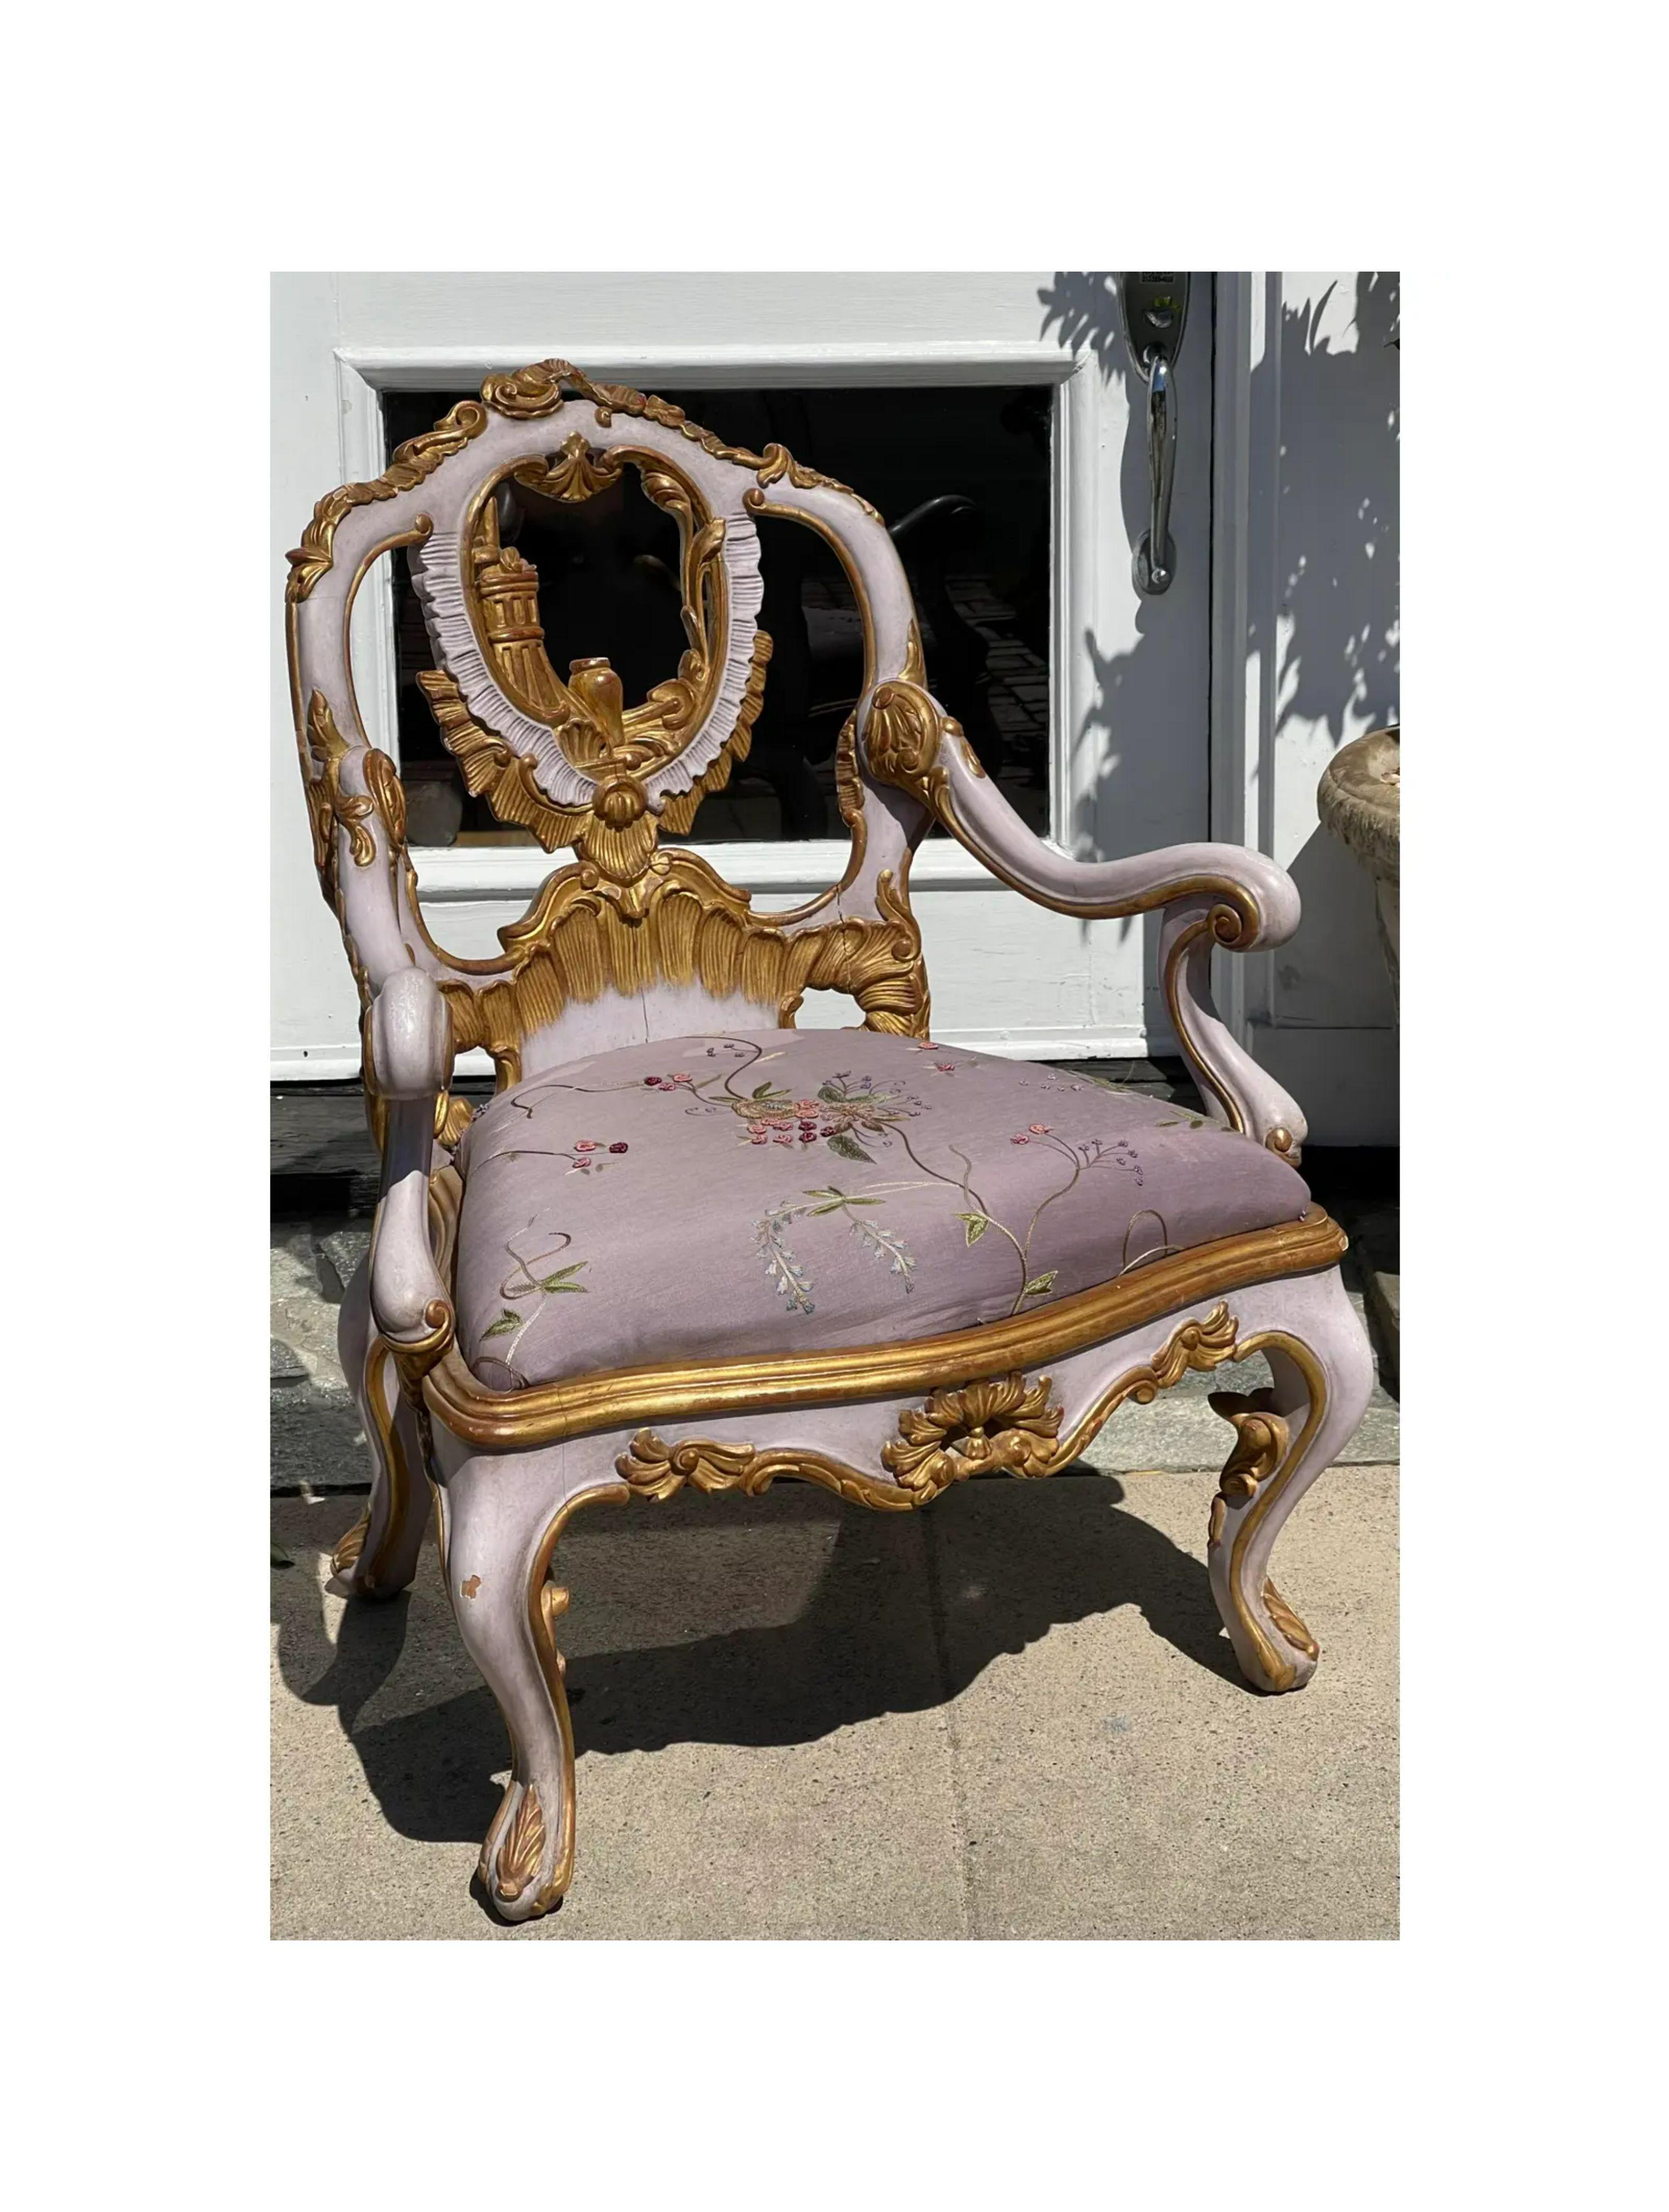 Venetian purple palazzo arm chair by Charles Pollock for William Switzer.
Additional information:
Materials: Giltwood, silk
Color: Purple
Brand: William Switzer
Designer: Charles Pollock
Period: 2000 - 2009
Styles: Italian, Louis XV,